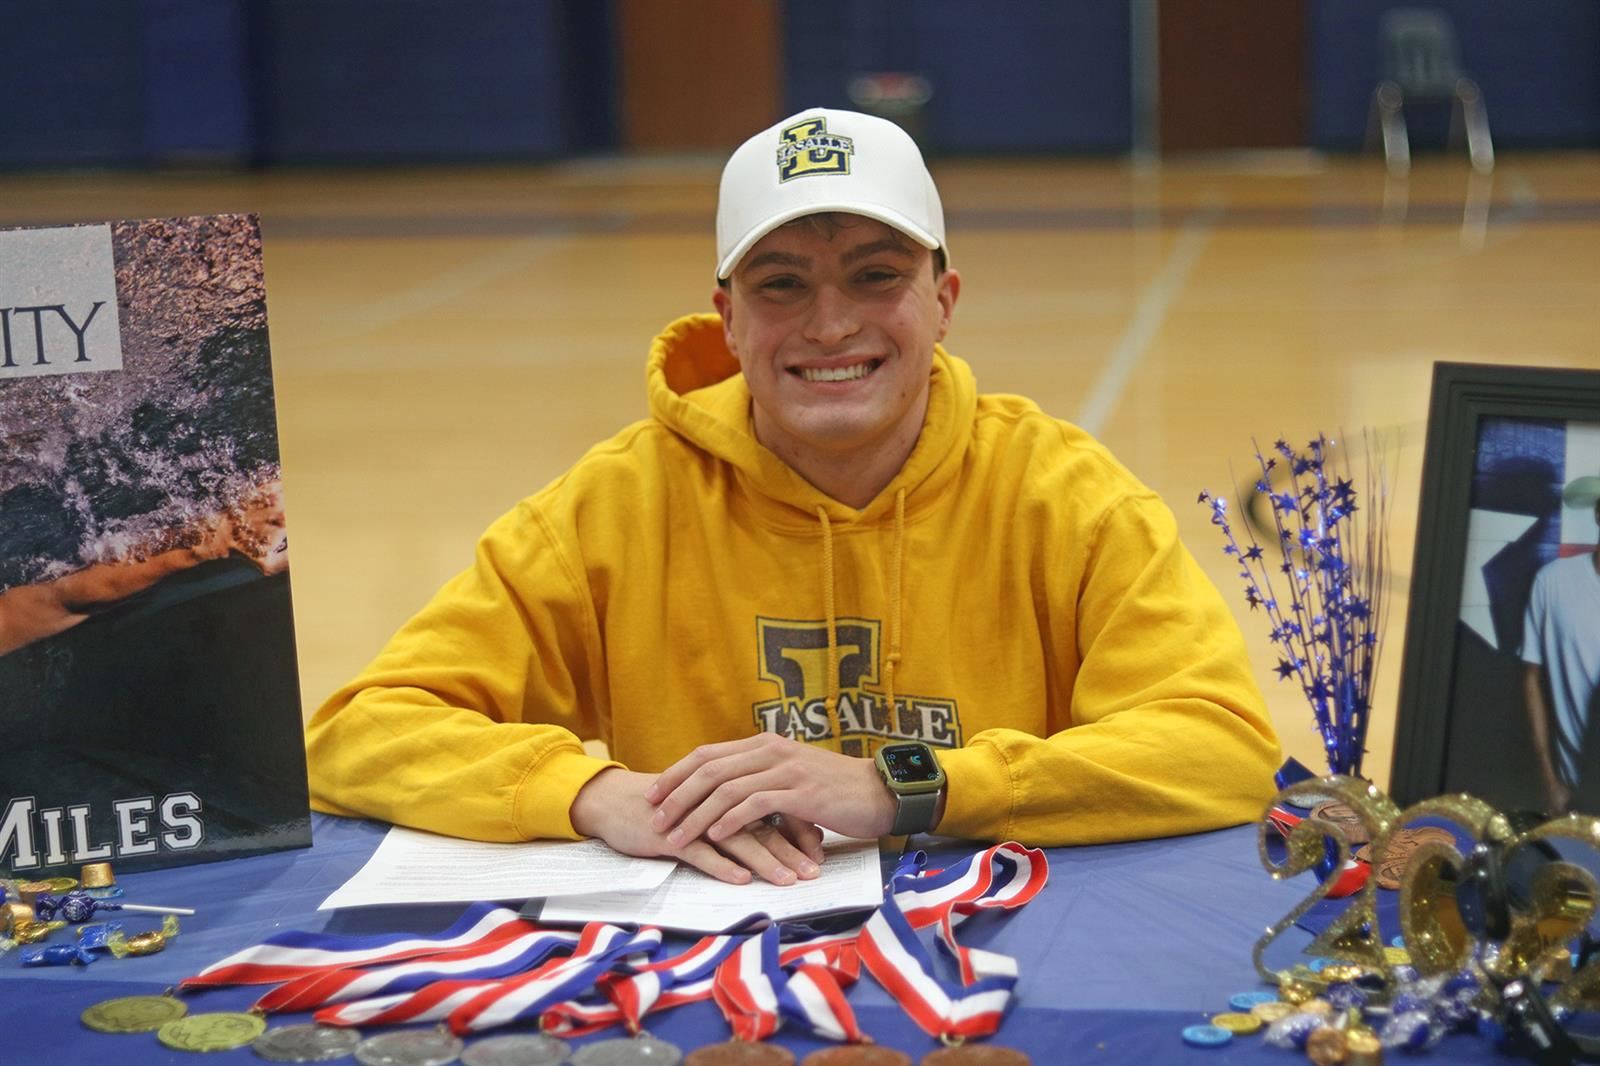 Cypress Creek High School senior Wesley Miles signed a letter of intent to La Salle University.